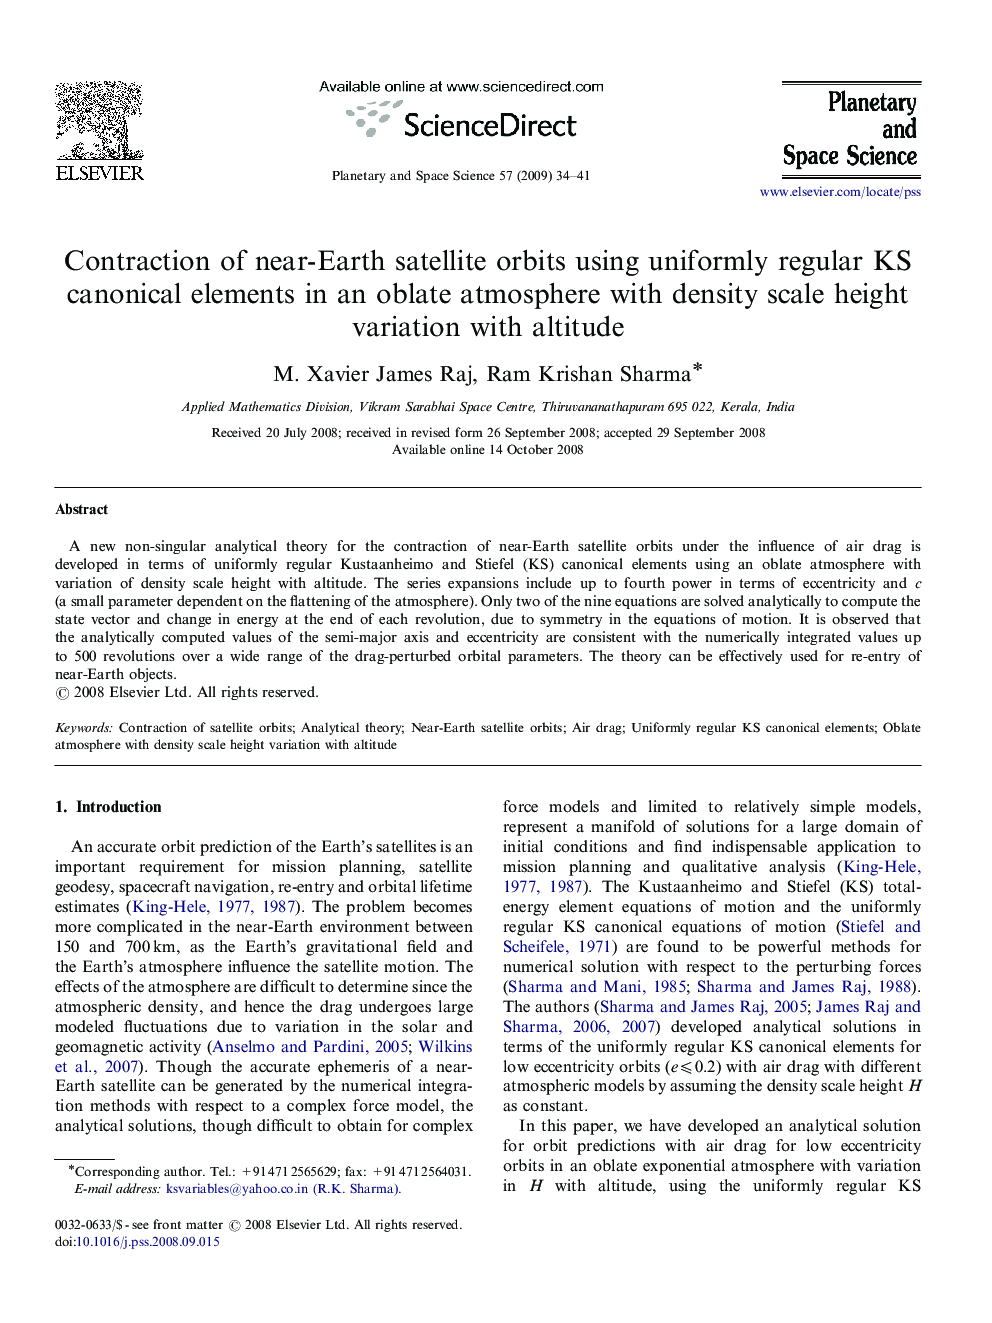 Contraction of near-Earth satellite orbits using uniformly regular KS canonical elements in an oblate atmosphere with density scale height variation with altitude